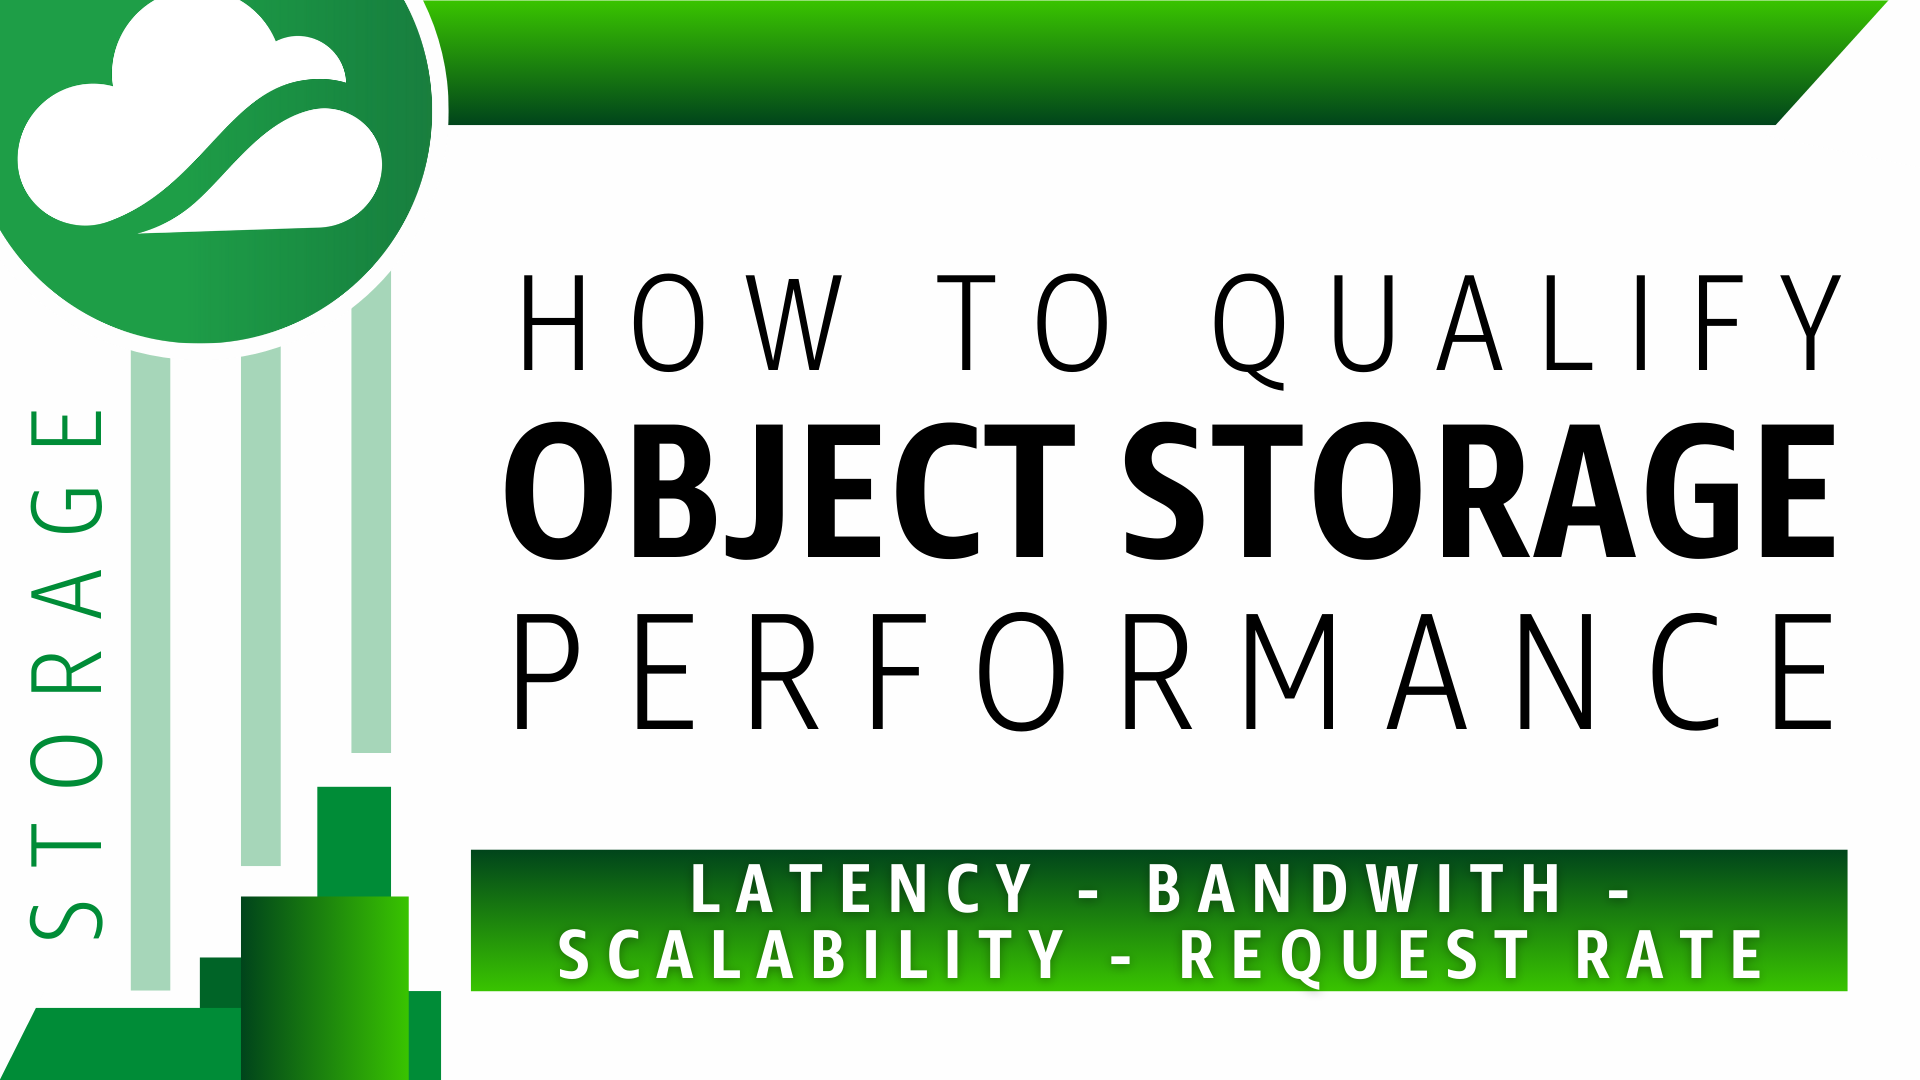 Understand Object storage by its performance